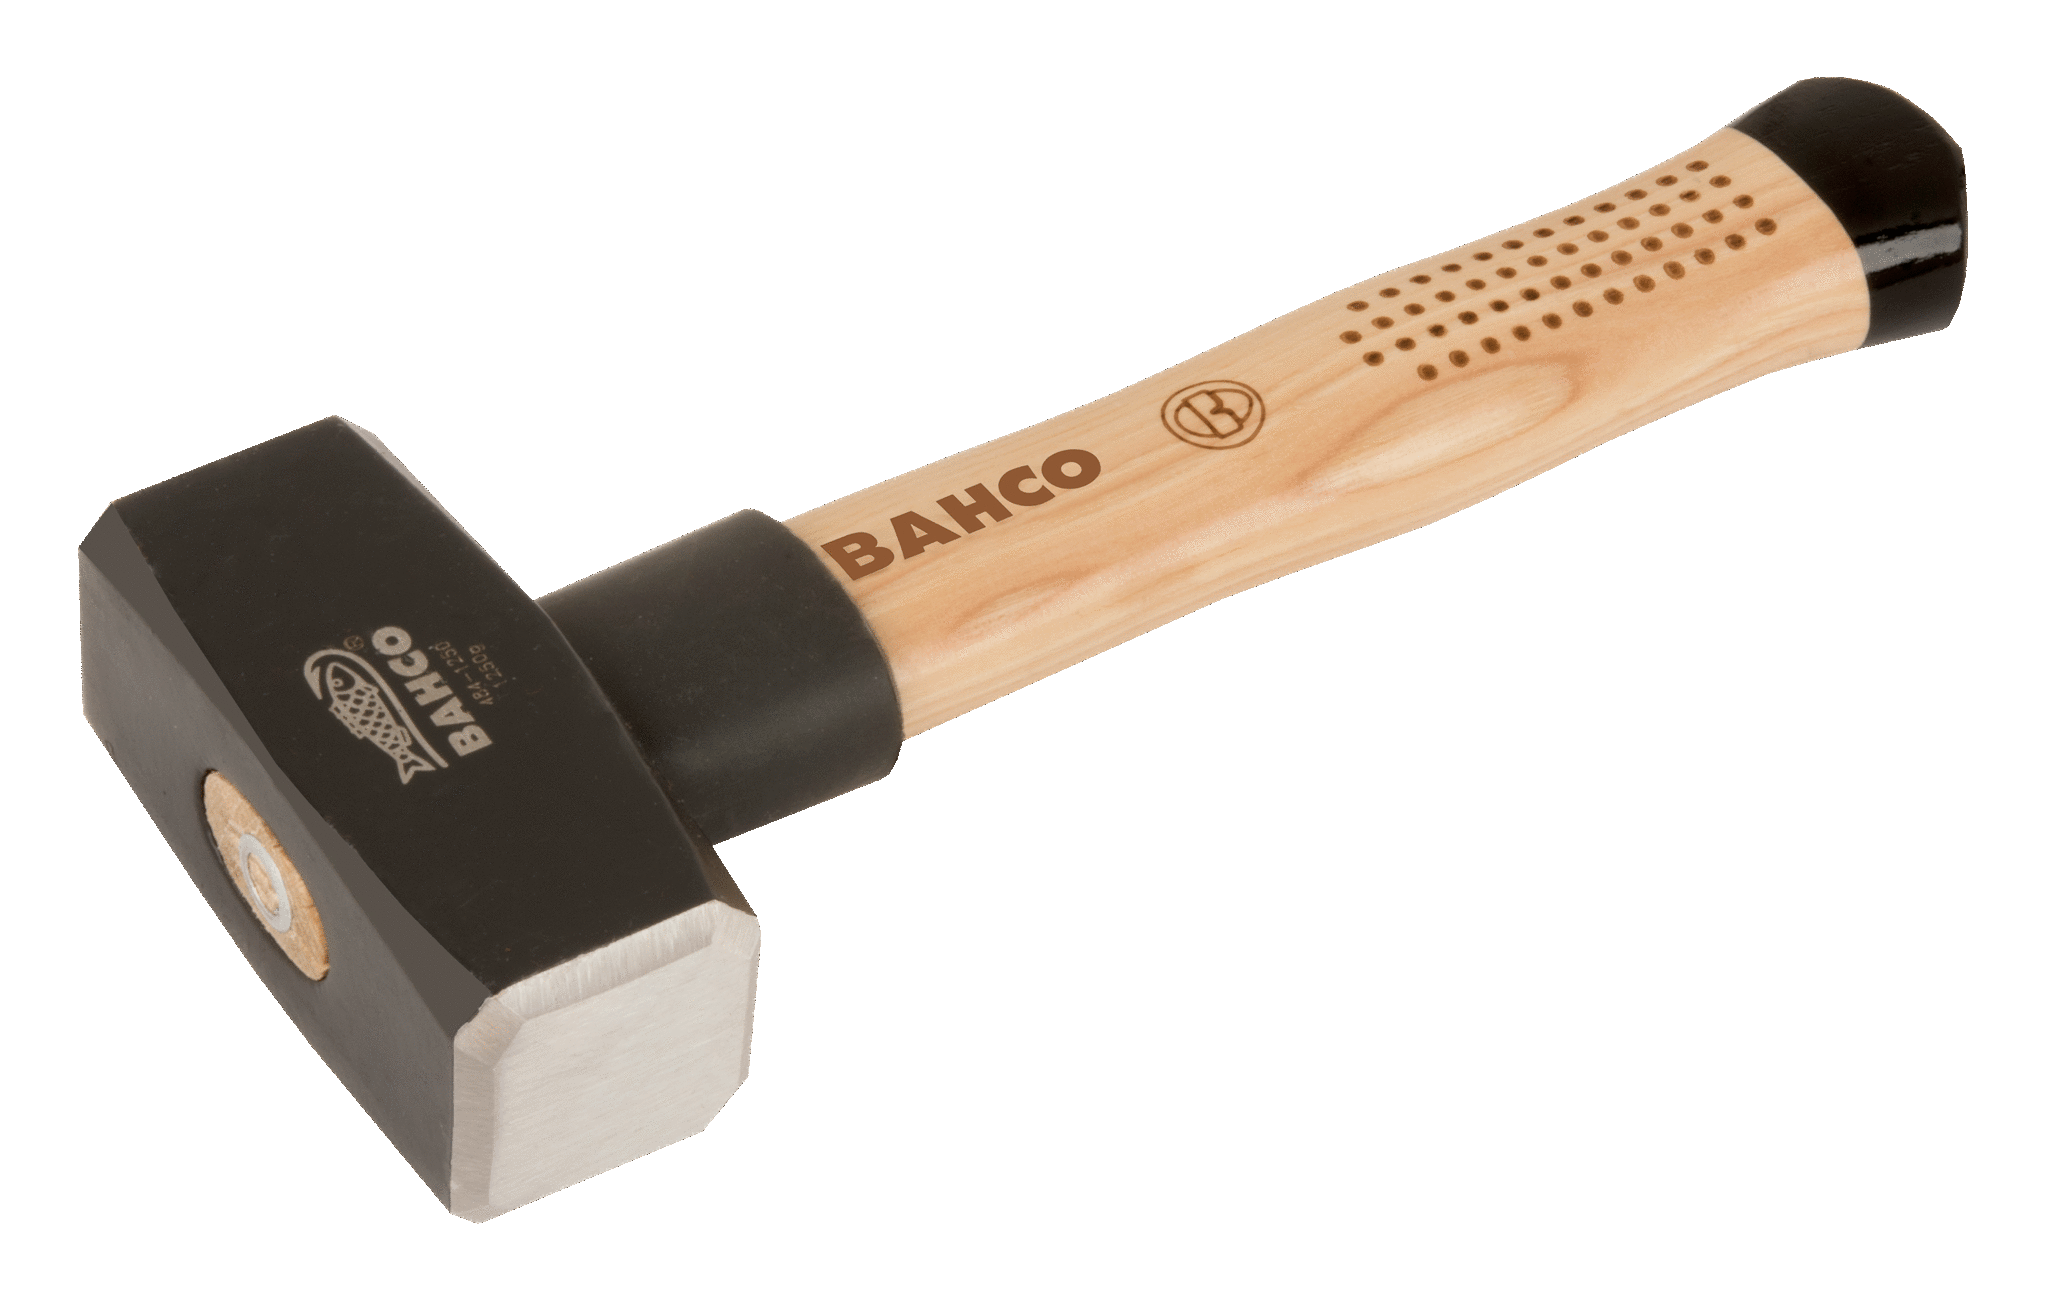 Club Hammers with Hickory Handle (52oz) - 484-1500 by Bahco